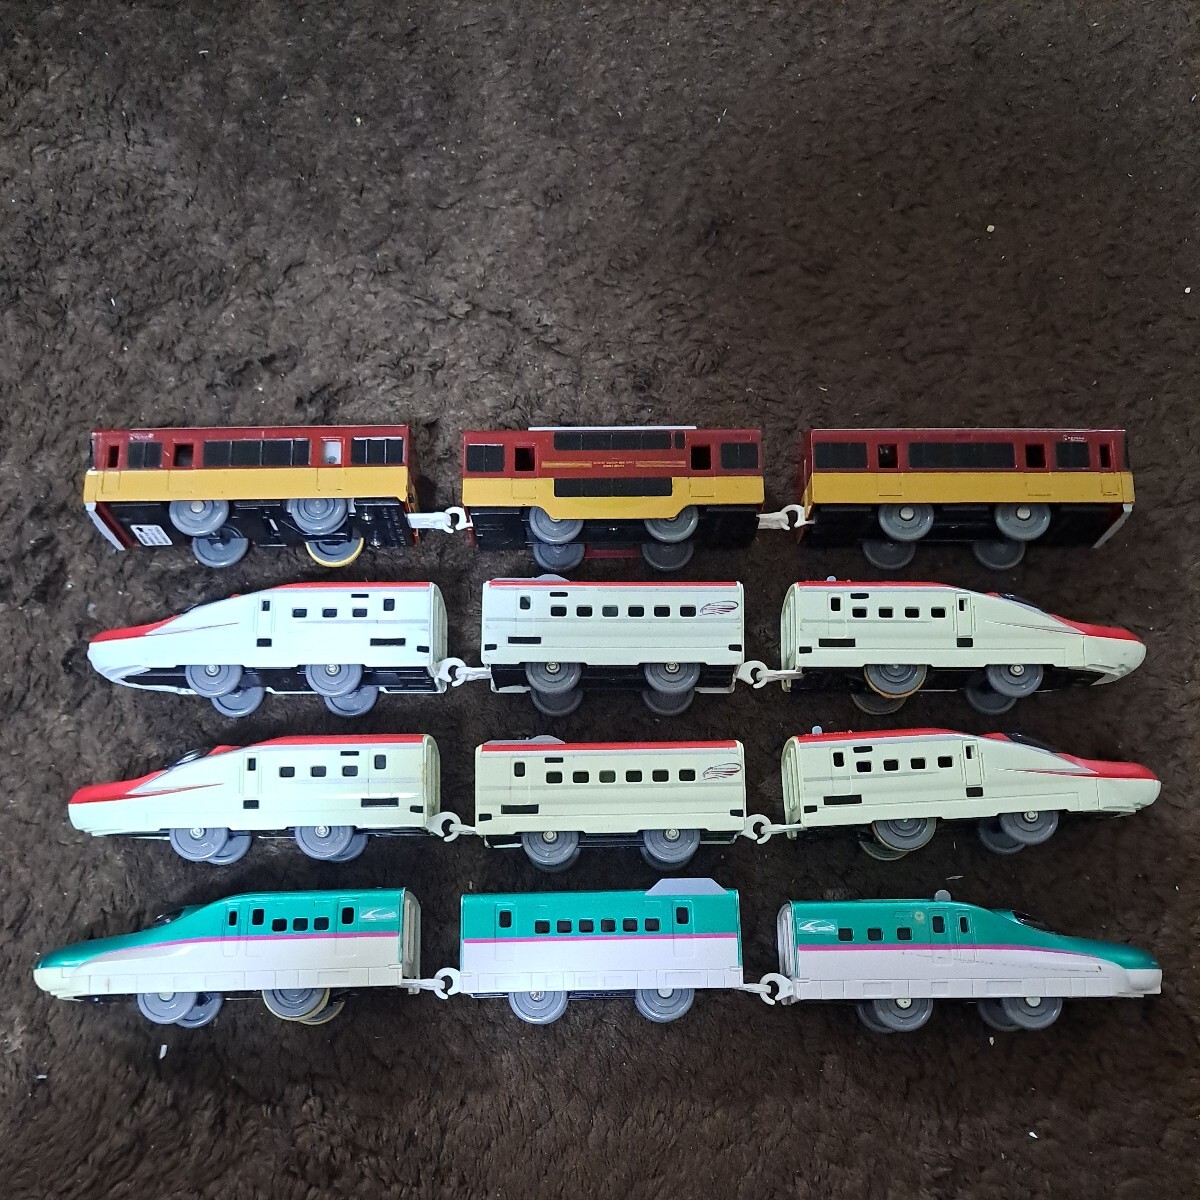  Junk Plarail capital .8000 series .E6 series whirligig 2 pcs .E5 series Hayabusa payment on delivery 60 size 